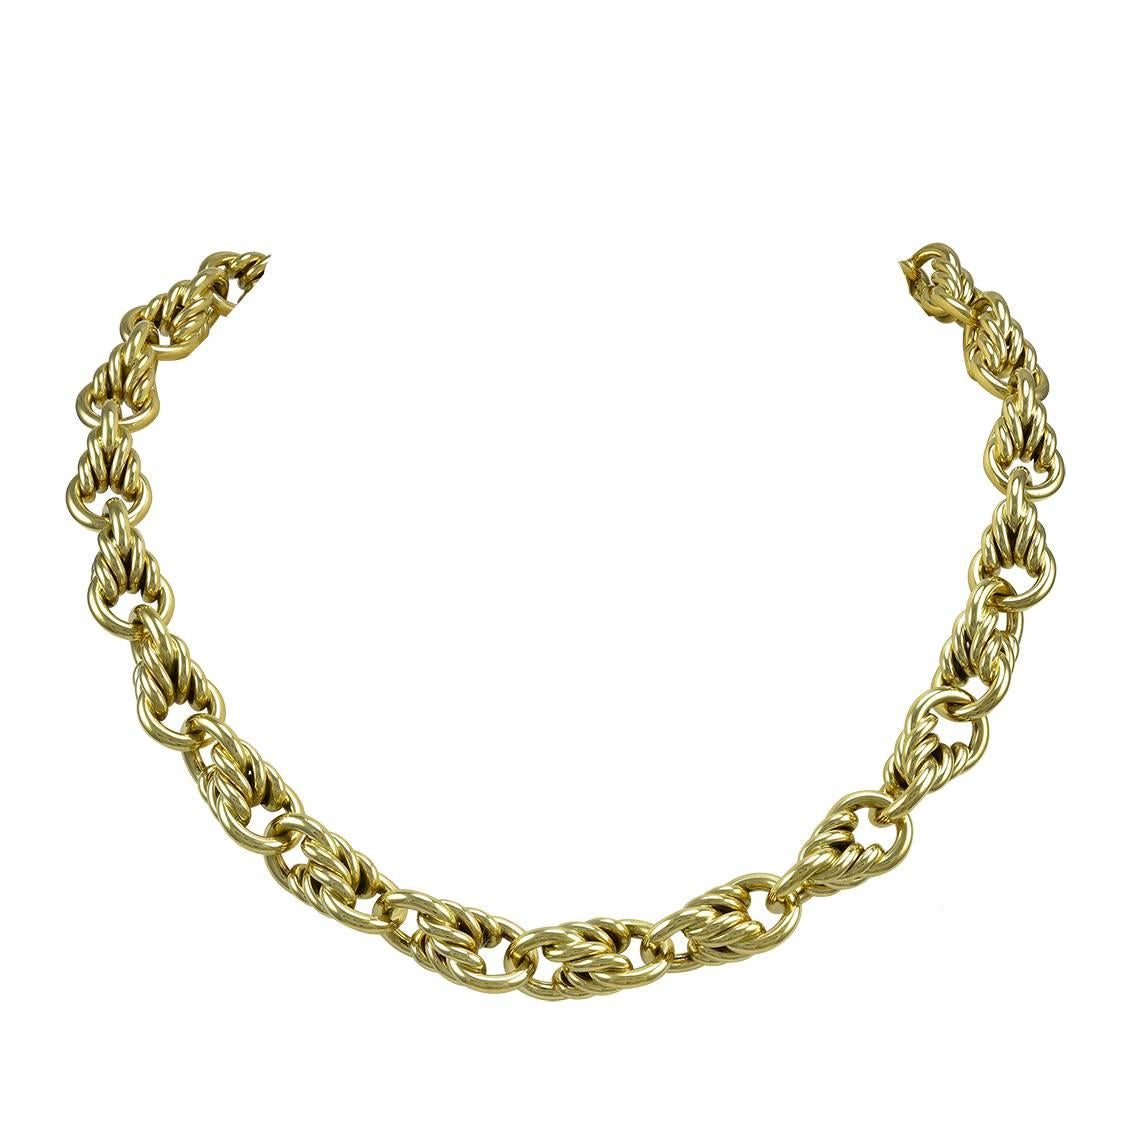 Tiffany & Co. Outstanding Gold Link Necklace